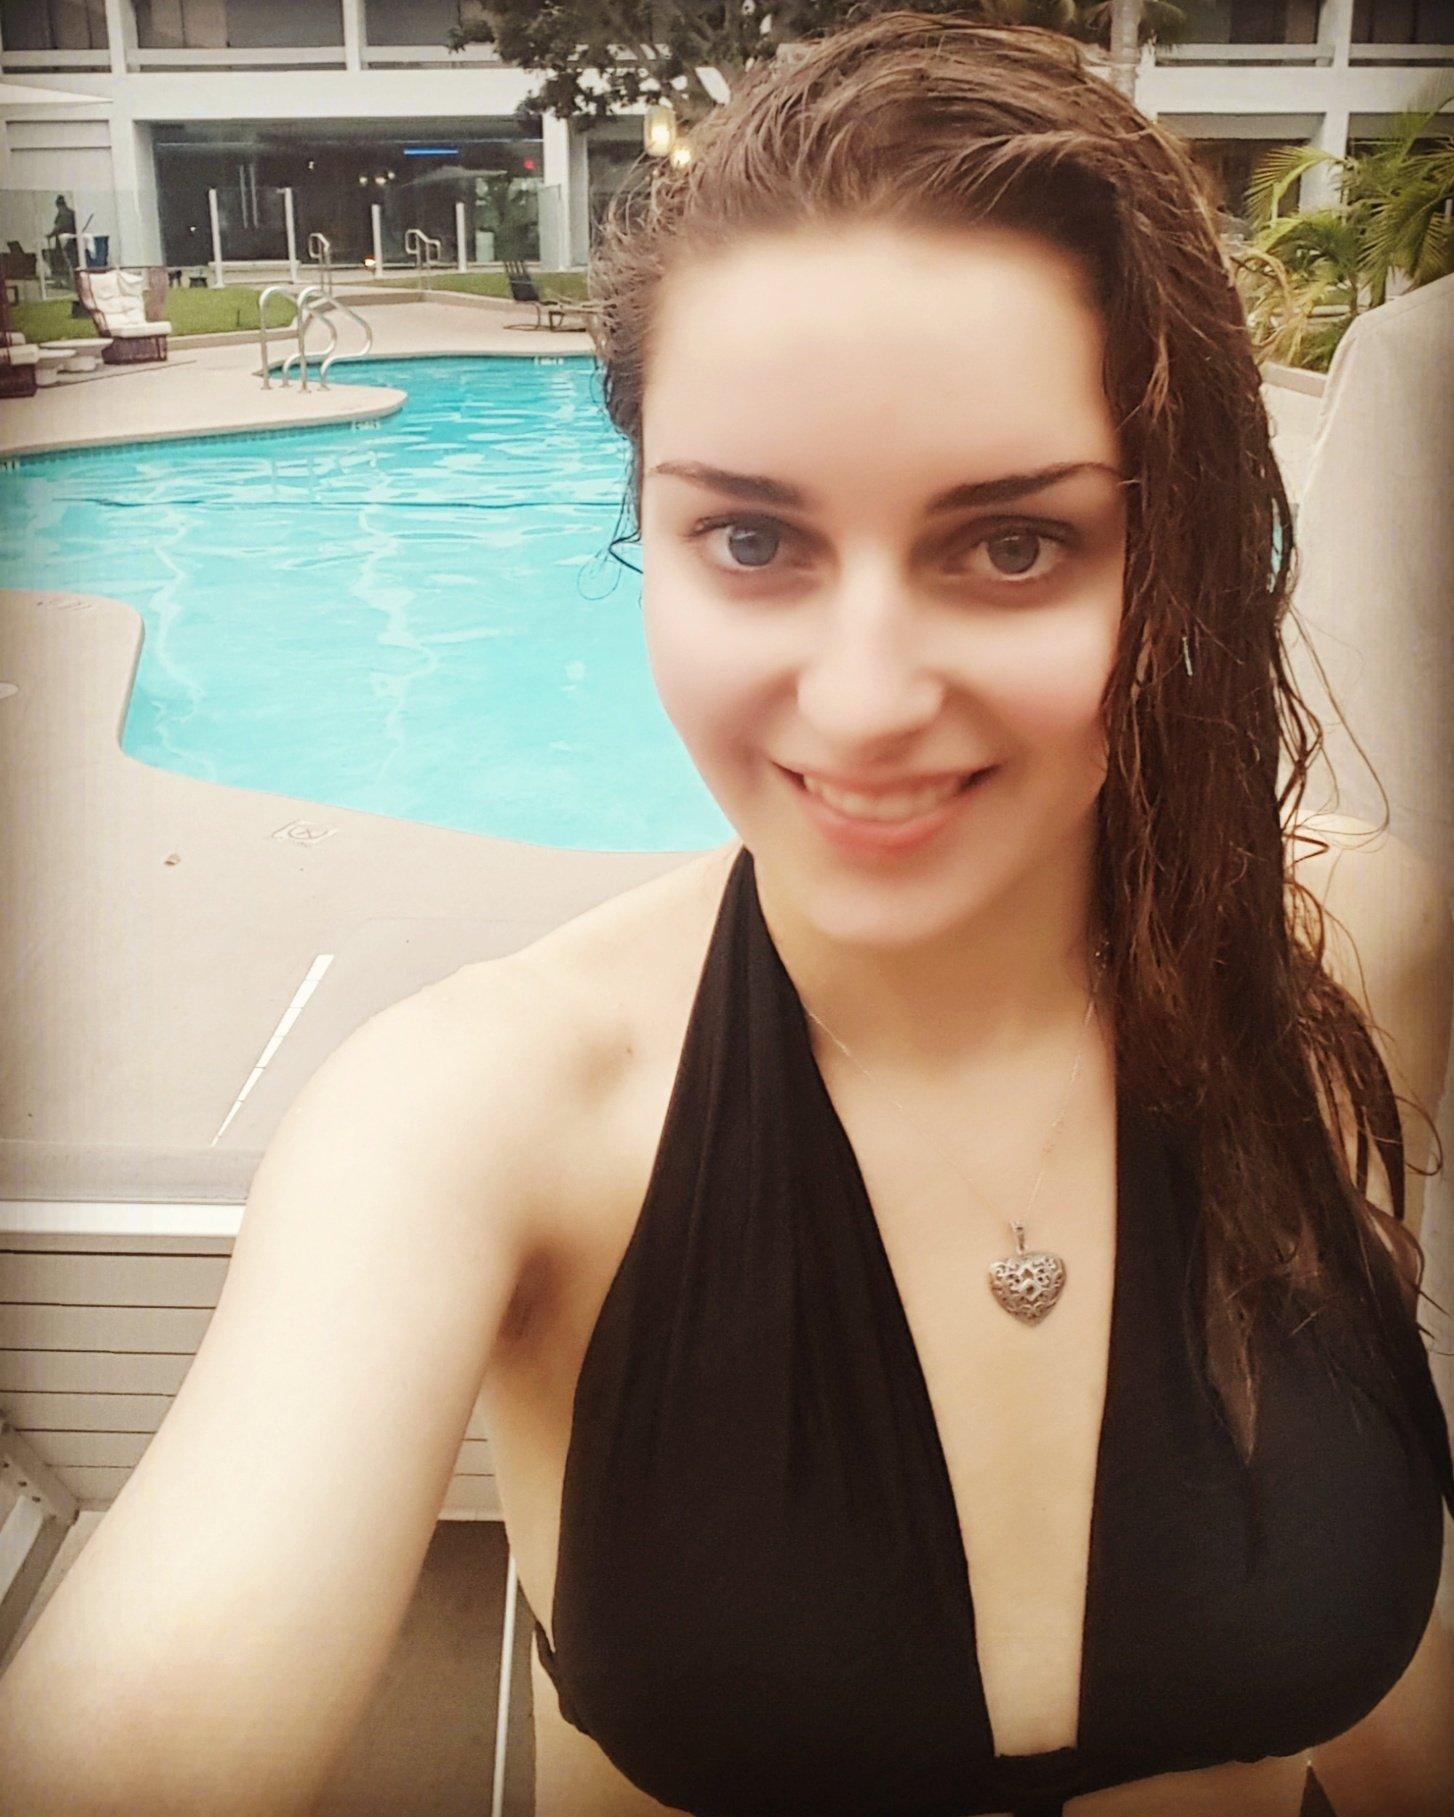 70+ Loserfruit Hot Pictures Are Too Much For You To Handle 44